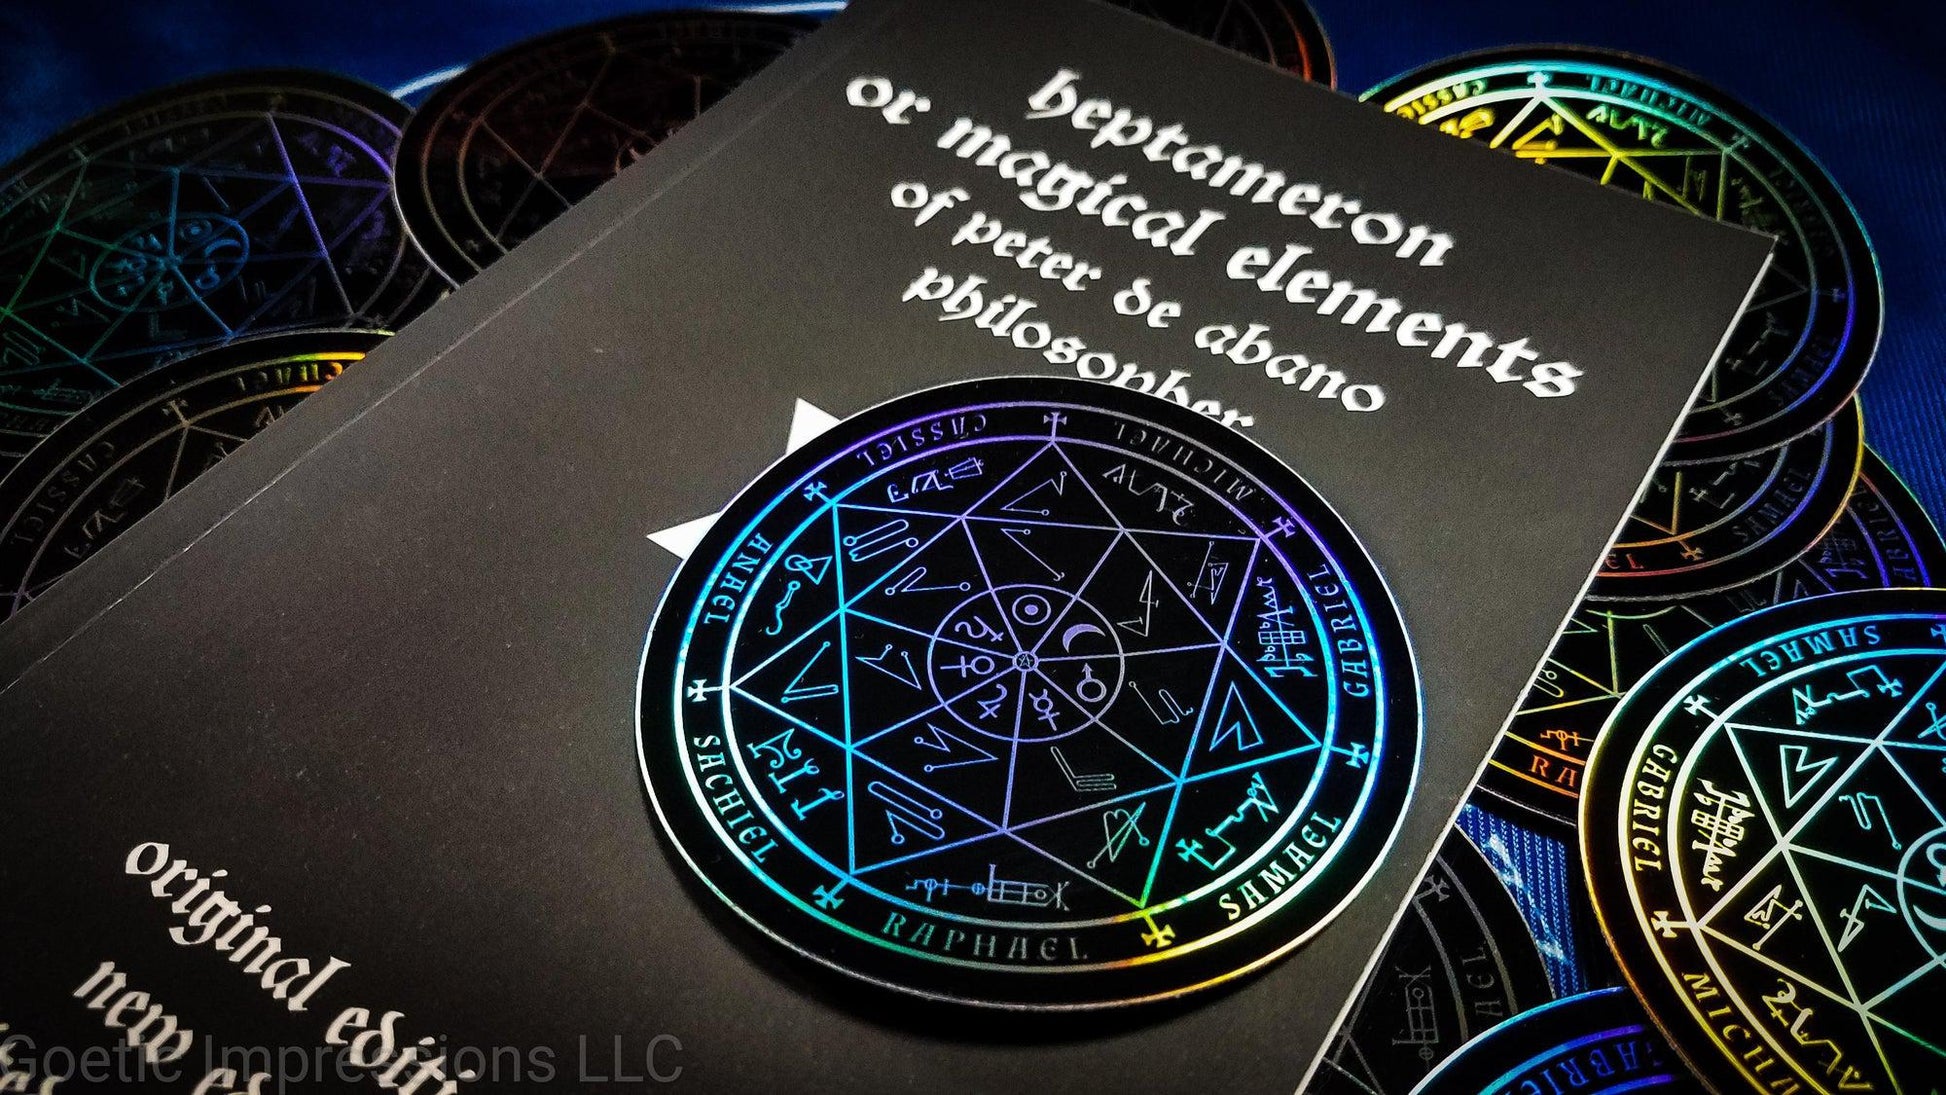 Heptameron inspired planetary archangel seal holographic  sticker.